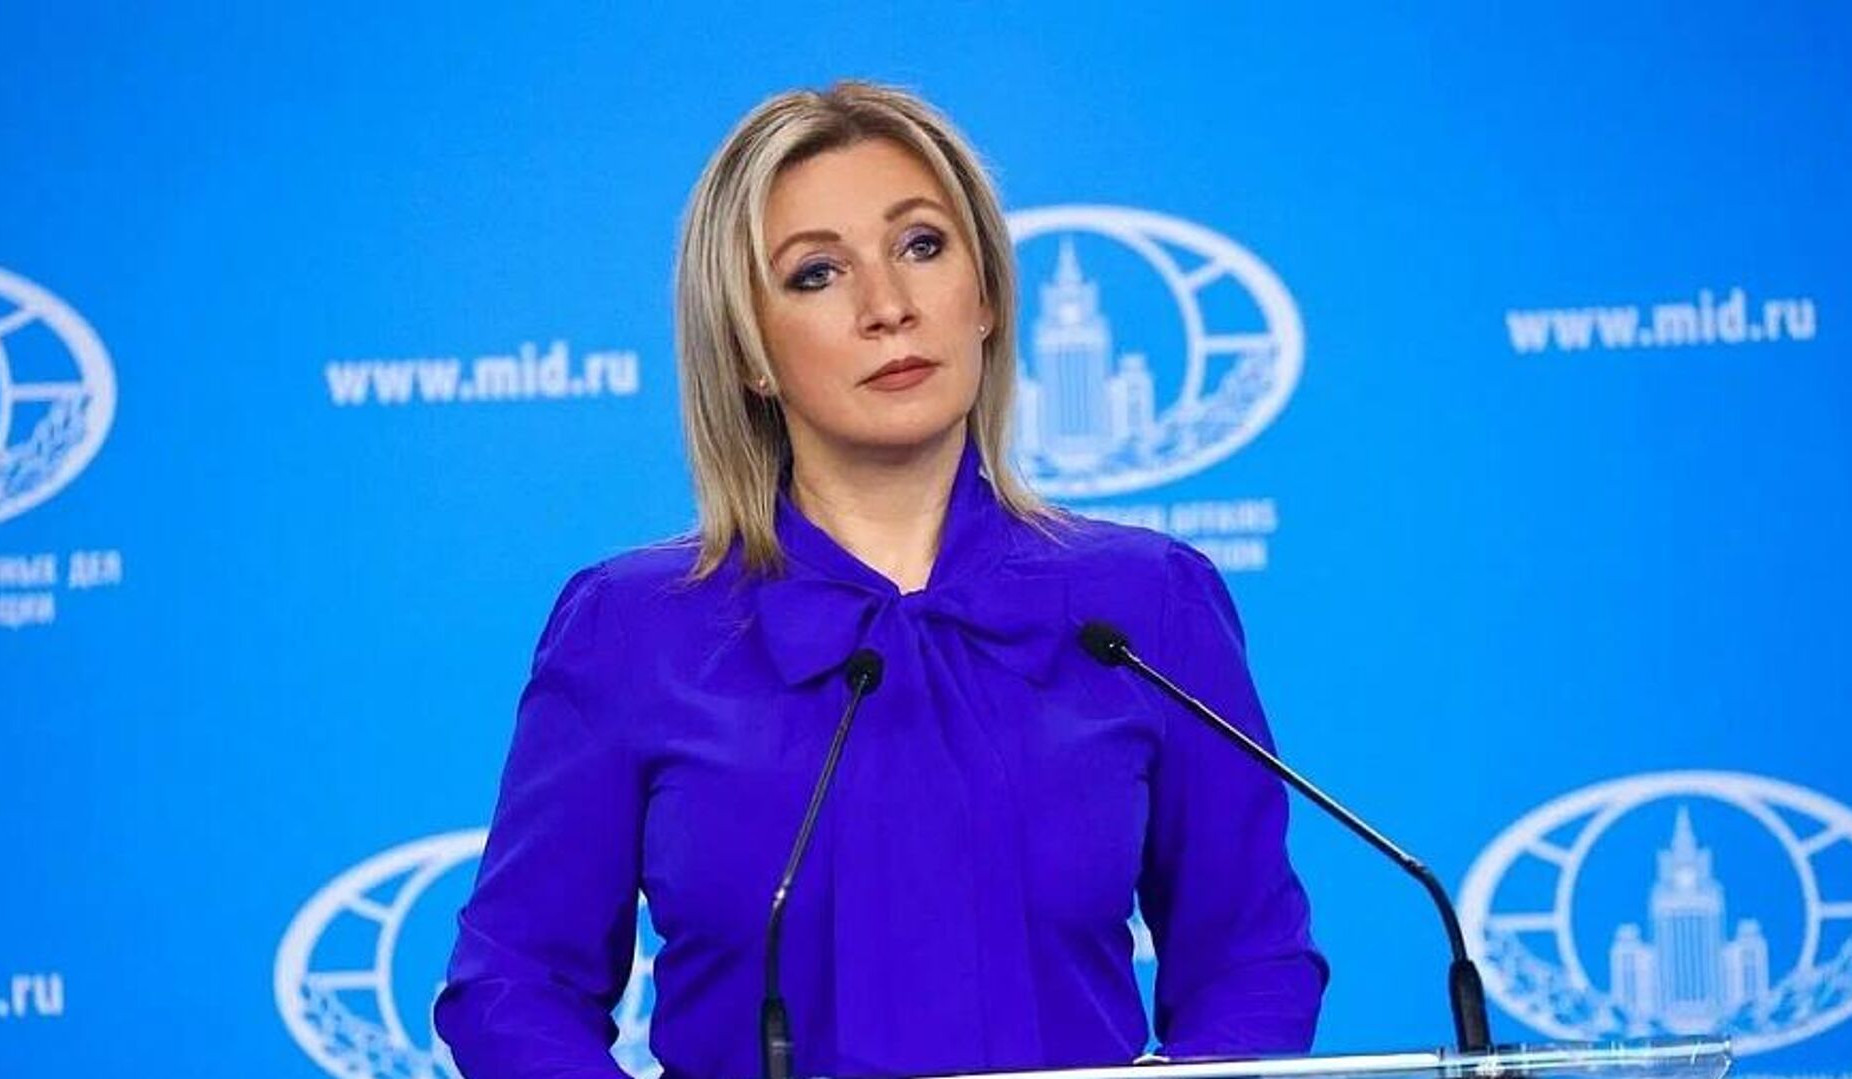 It is very dangerous: Zakharova about possibility of Armenia leaving CSTO